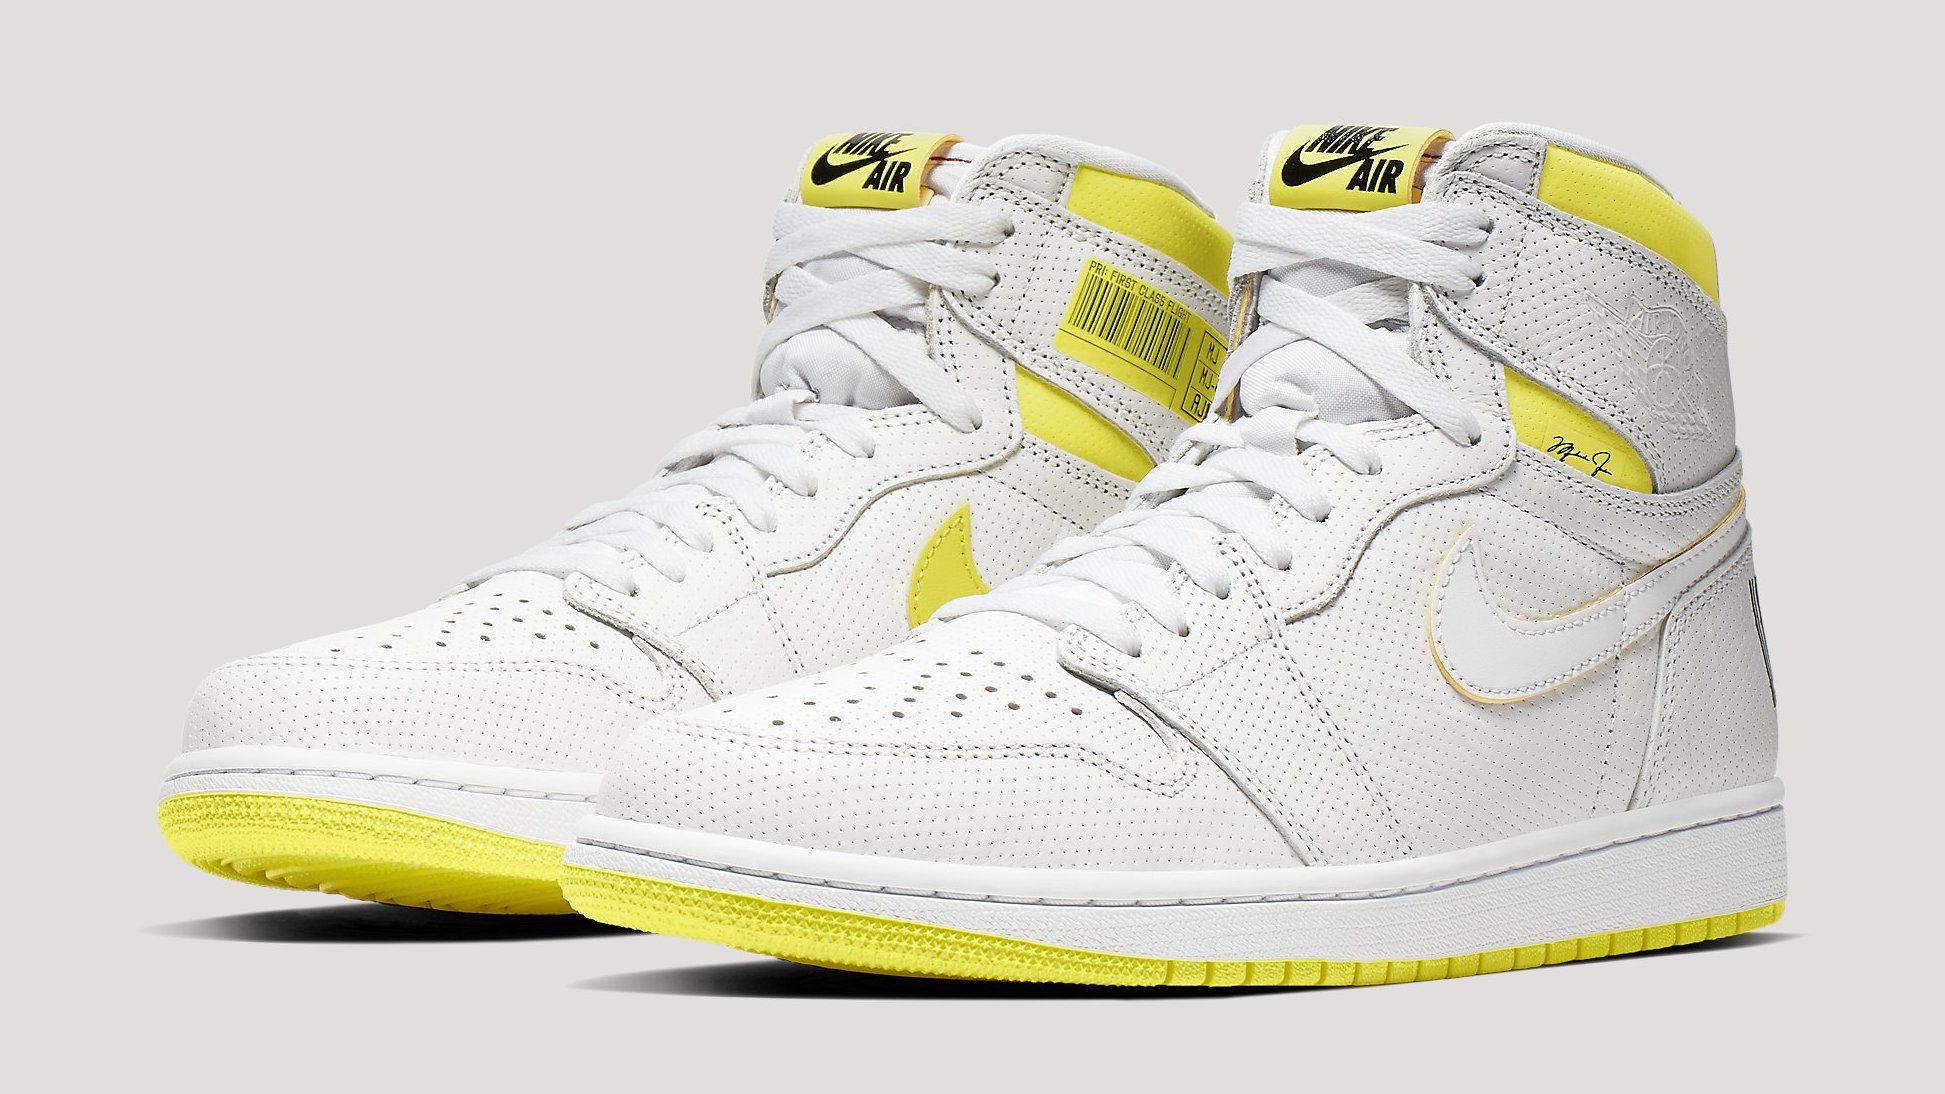 Air Jordan 1 'First Class Flight' White/Dynamic Yellow-Black 55088-170  Release Date | Sole Collector